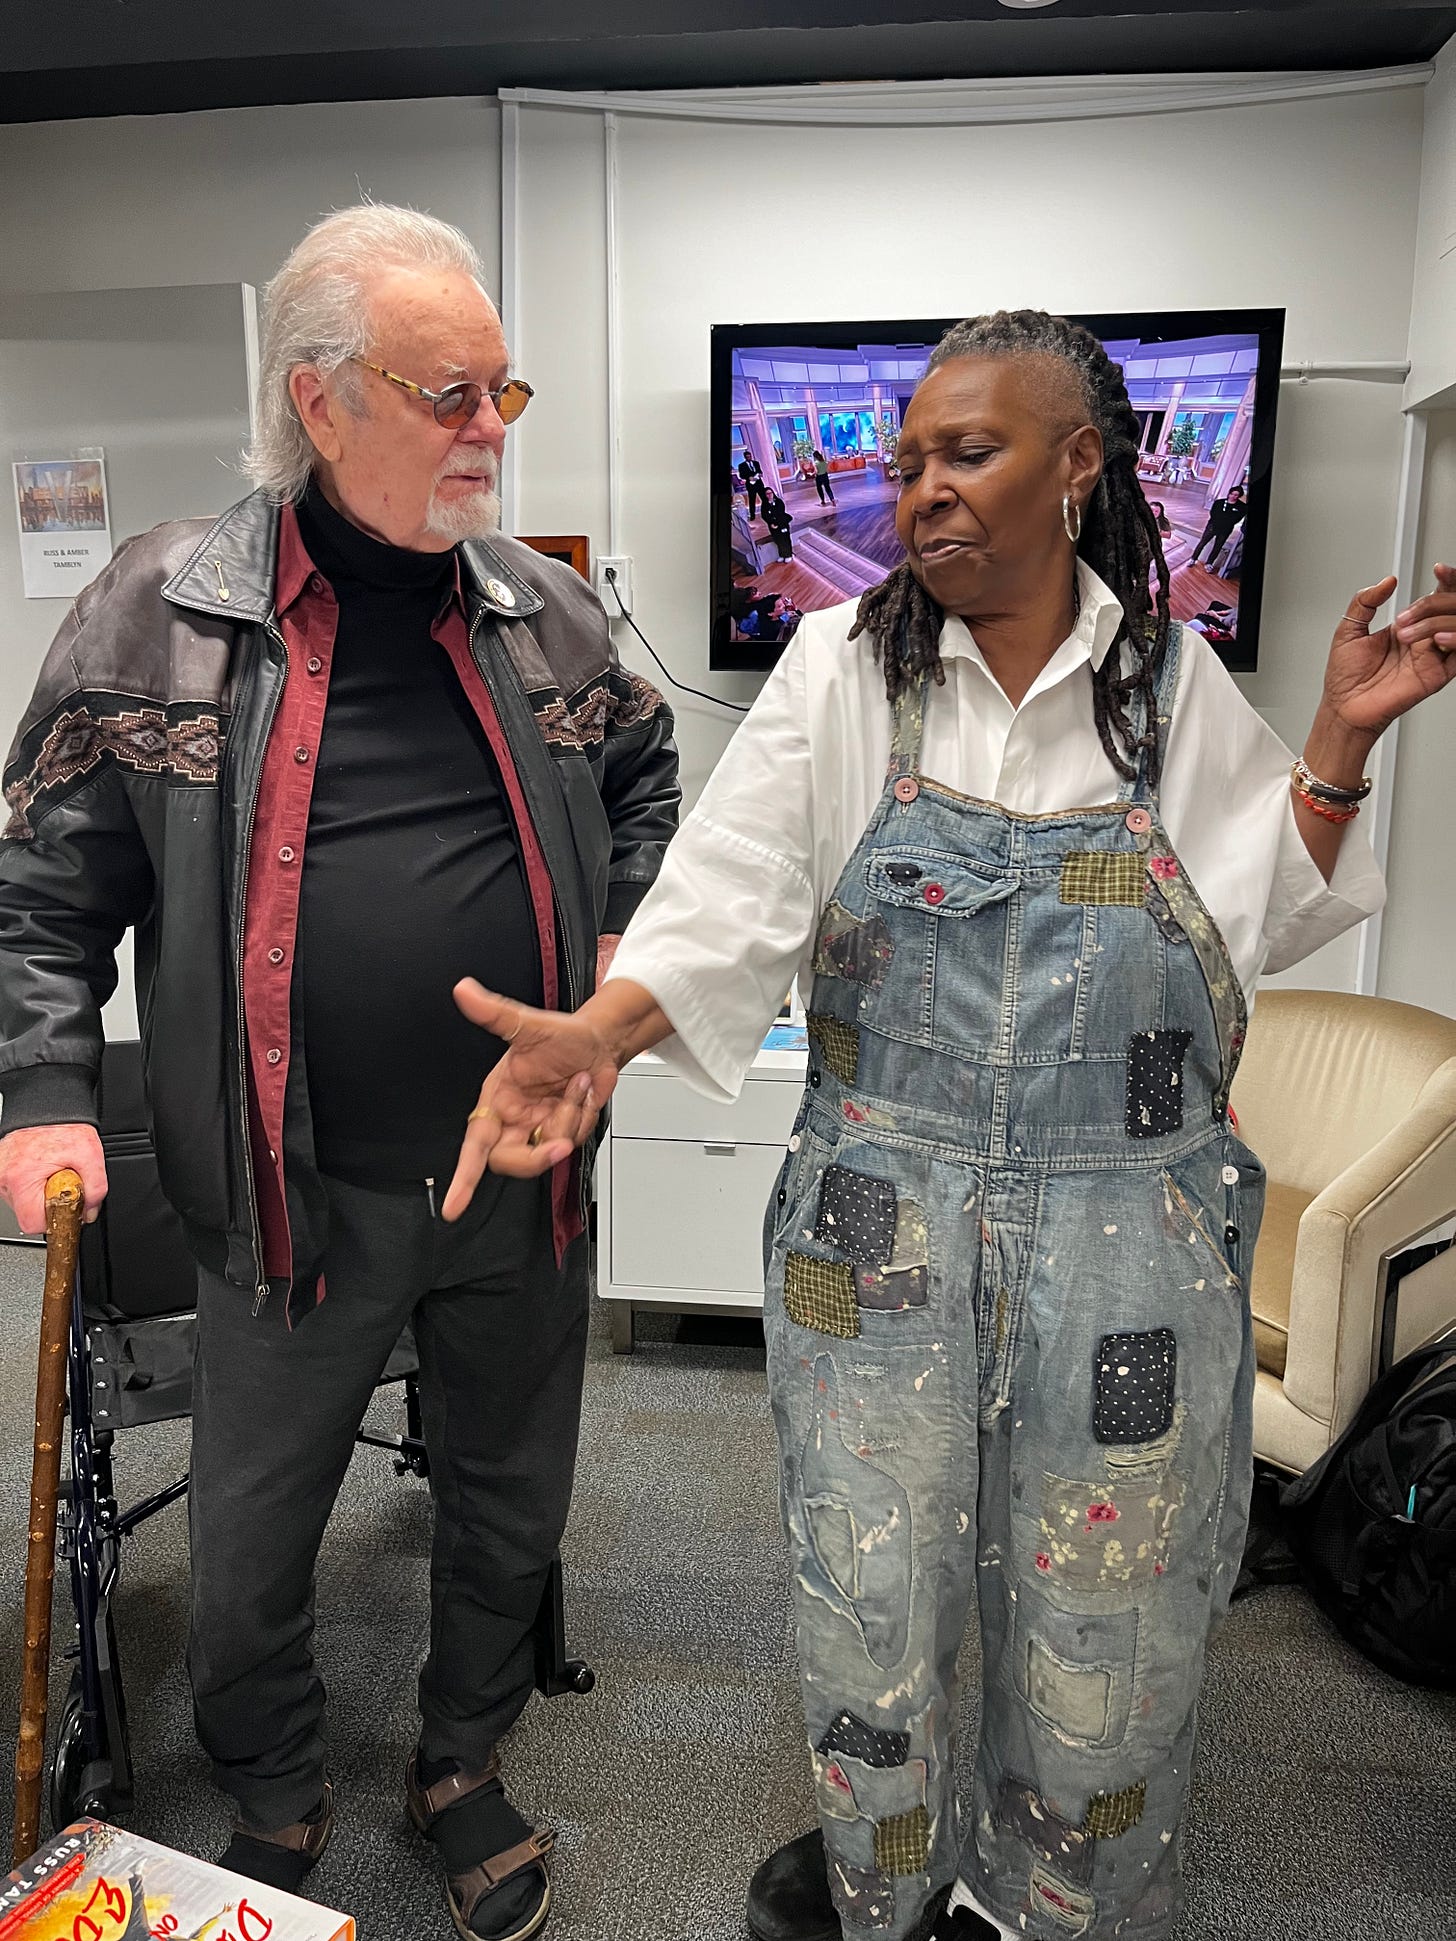 Russ Tamblyn and Whoopi Goldberg speak animatedly in "The View" greenroom. 